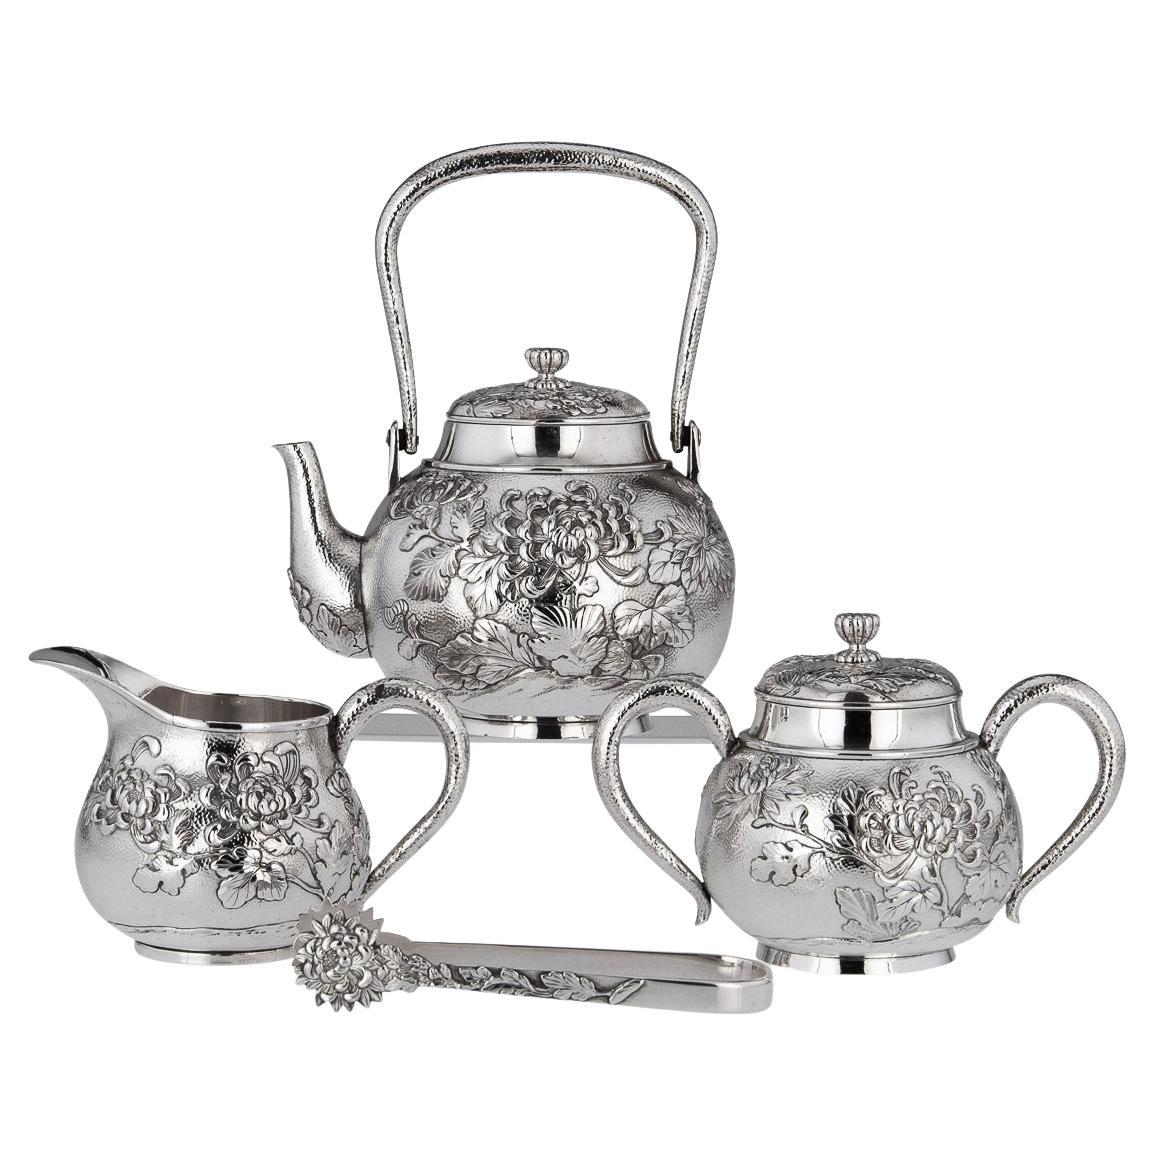 20th Century Japanese Meiji Solid Silver Four Piece Boxed Tea Service, c.1900